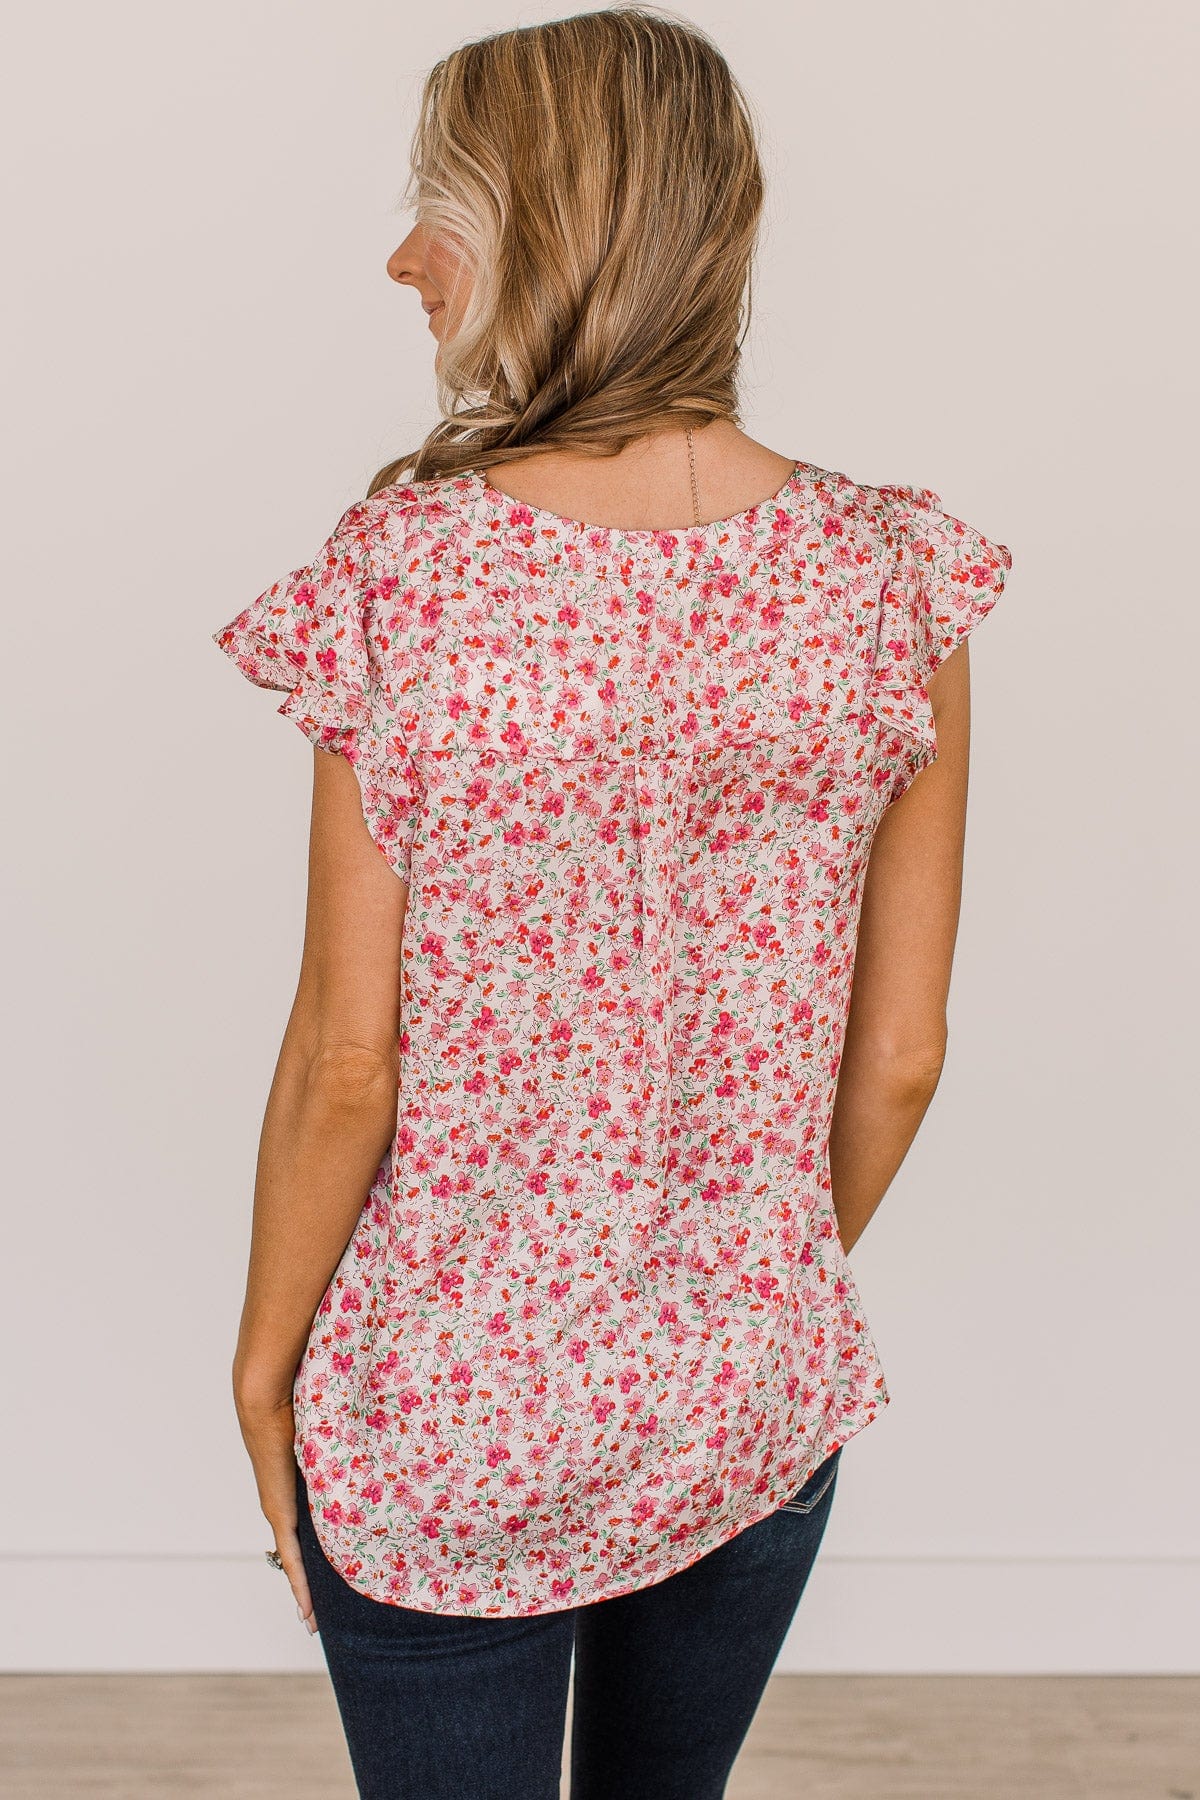 It's A New Day Floral Blouse- Ivory & Pink